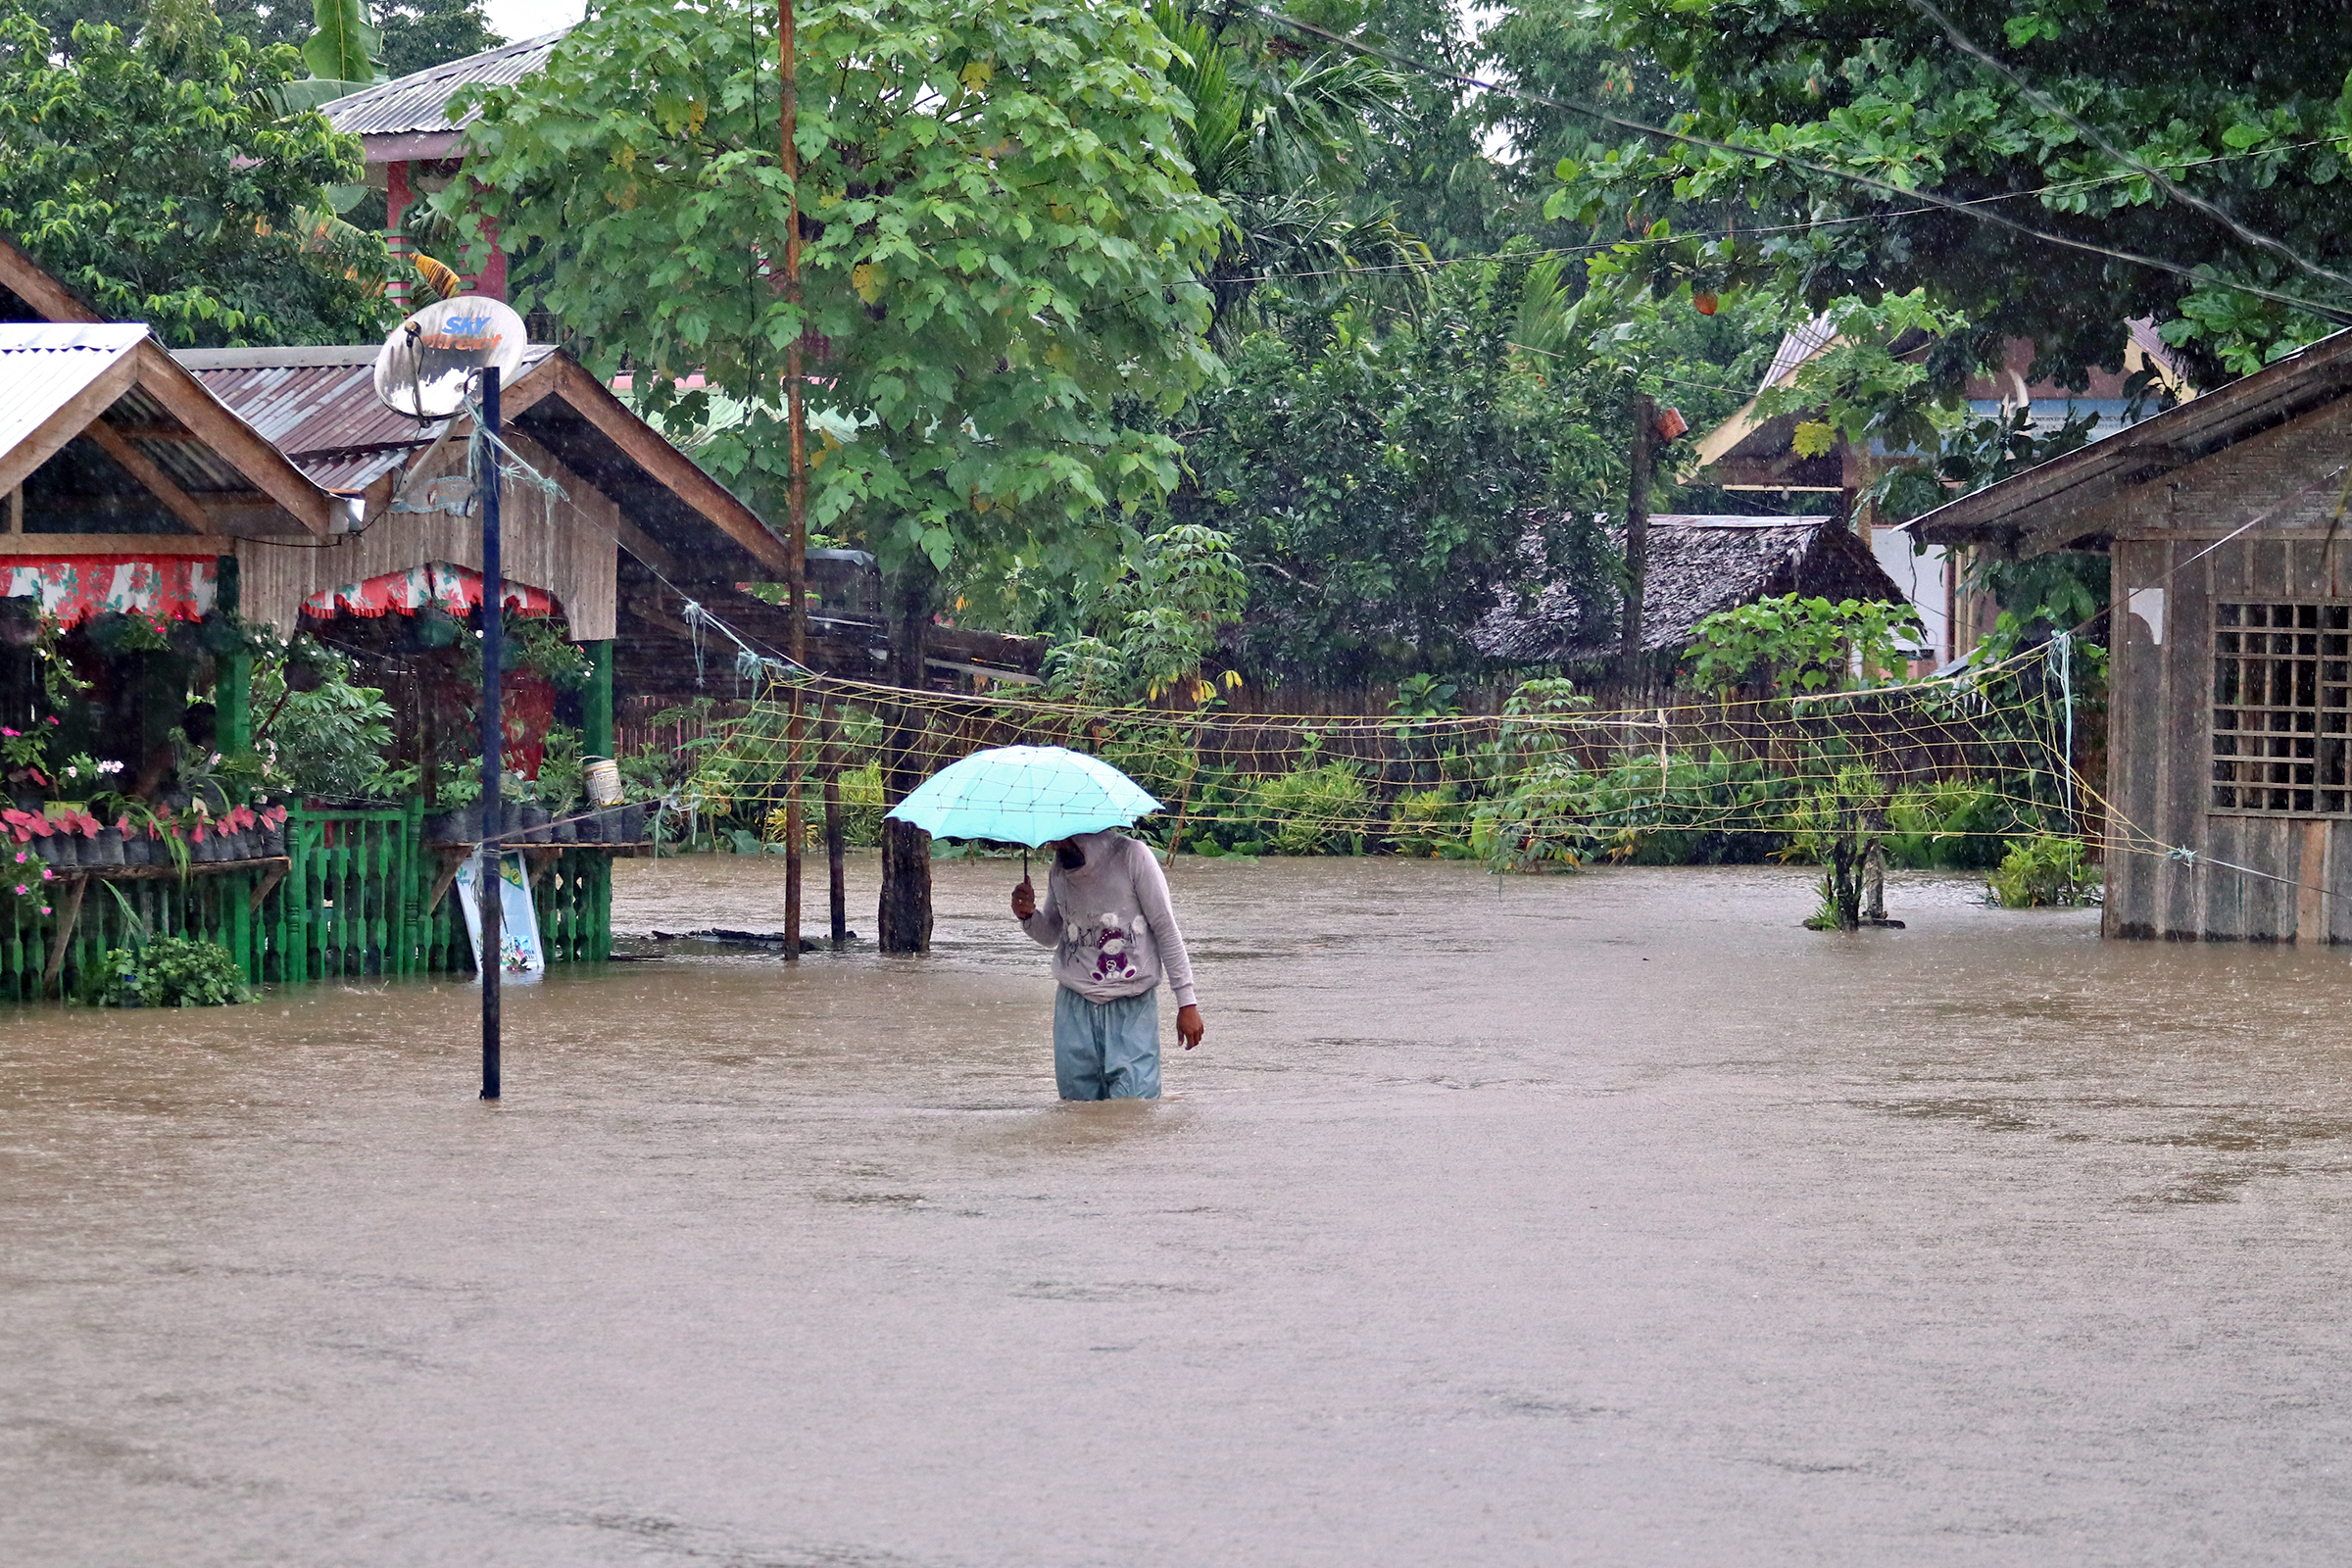 WEATHER DISTURBANCE   Floodwaters rise in the village of Los Angeles in Butuan City as Tropical Storm “Dante” (international name: Choi-wan) dumps heavy rain in Agusan del Norte province on Monday and Tuesday. —ERWIN M. MASCARIÑAS